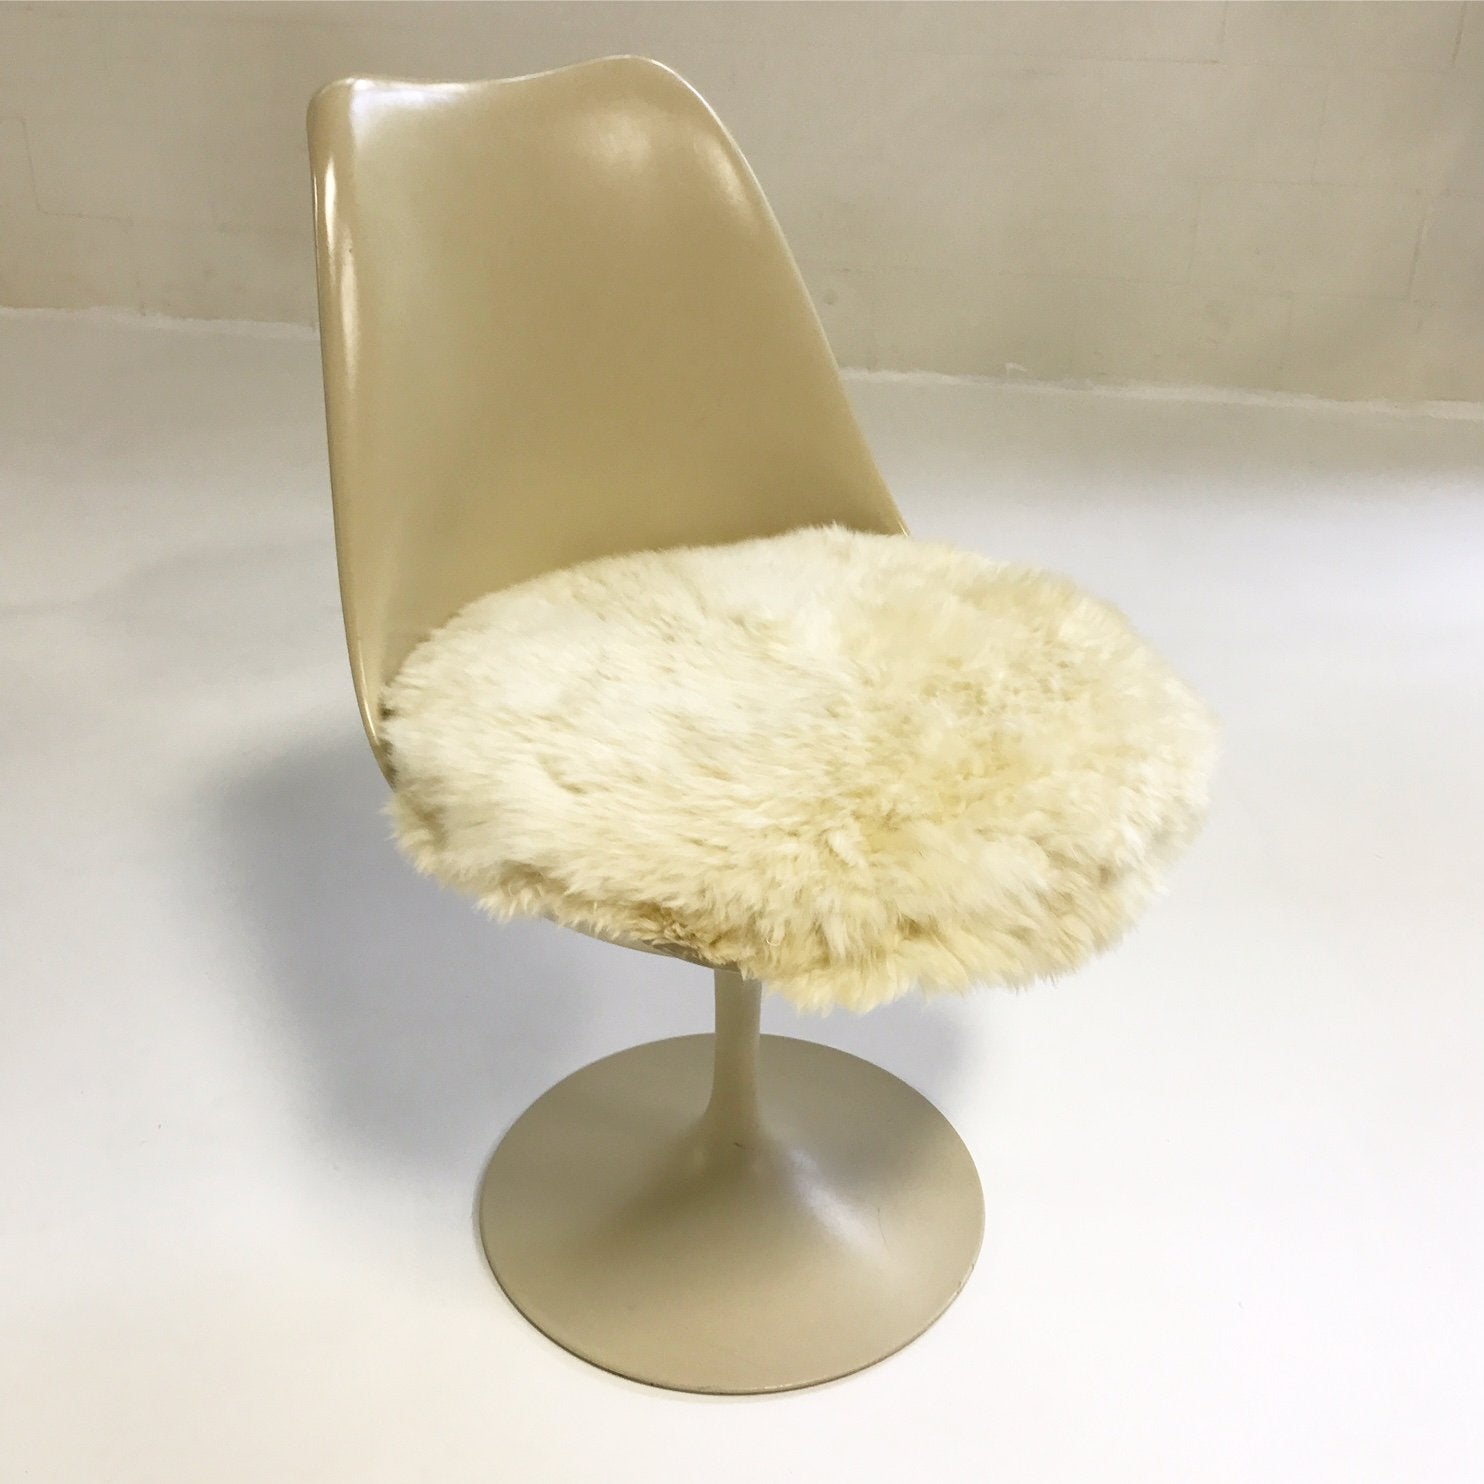 Tulip Chairs with Brazilian Sheepskin Cushions, set of 6 - FORSYTH